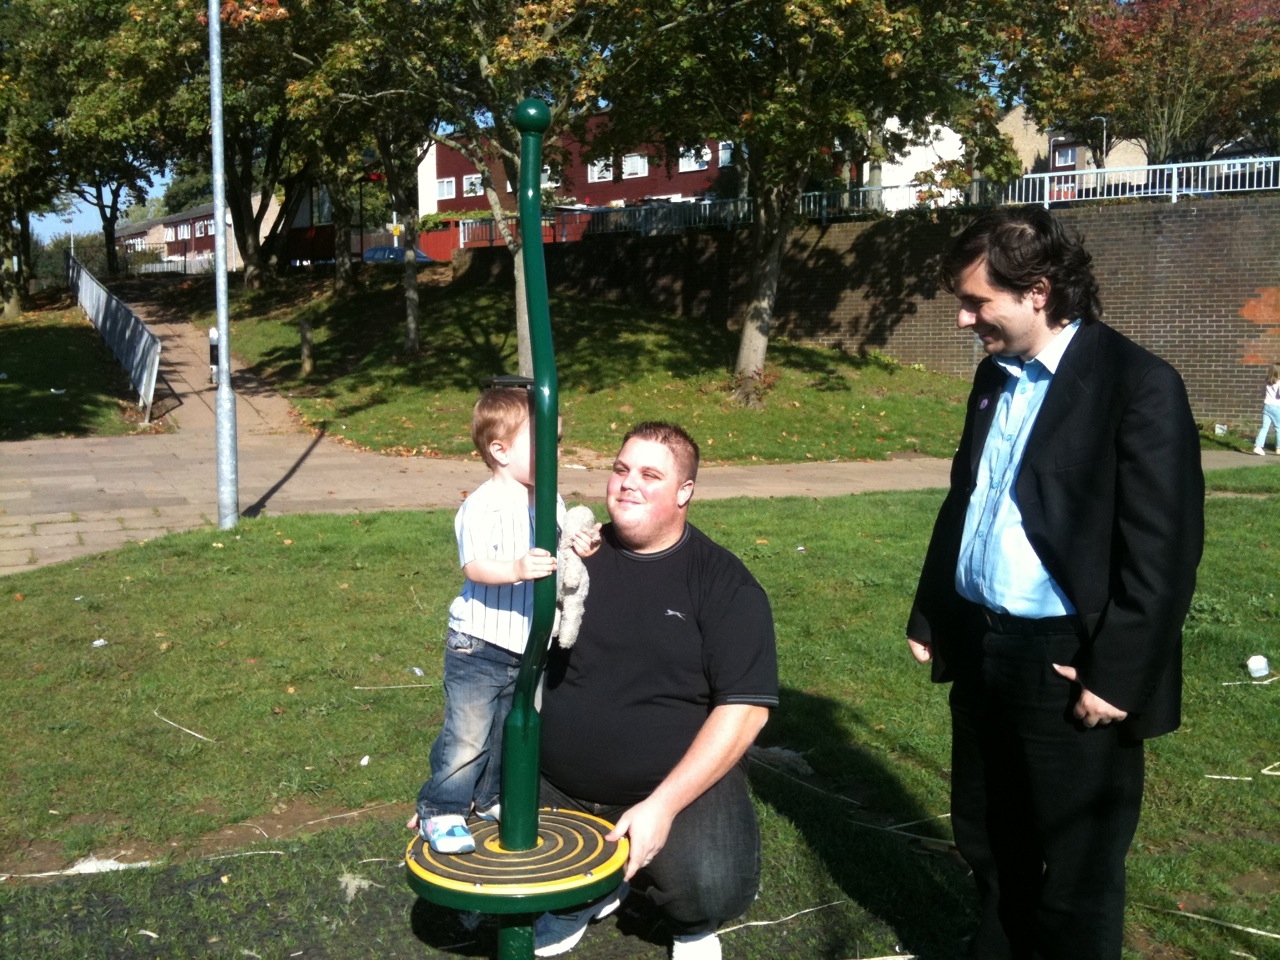 Mike Fuller & Cllr Richard Giddings at the new play area wirh Mike’s son (Jamie, aged 2).